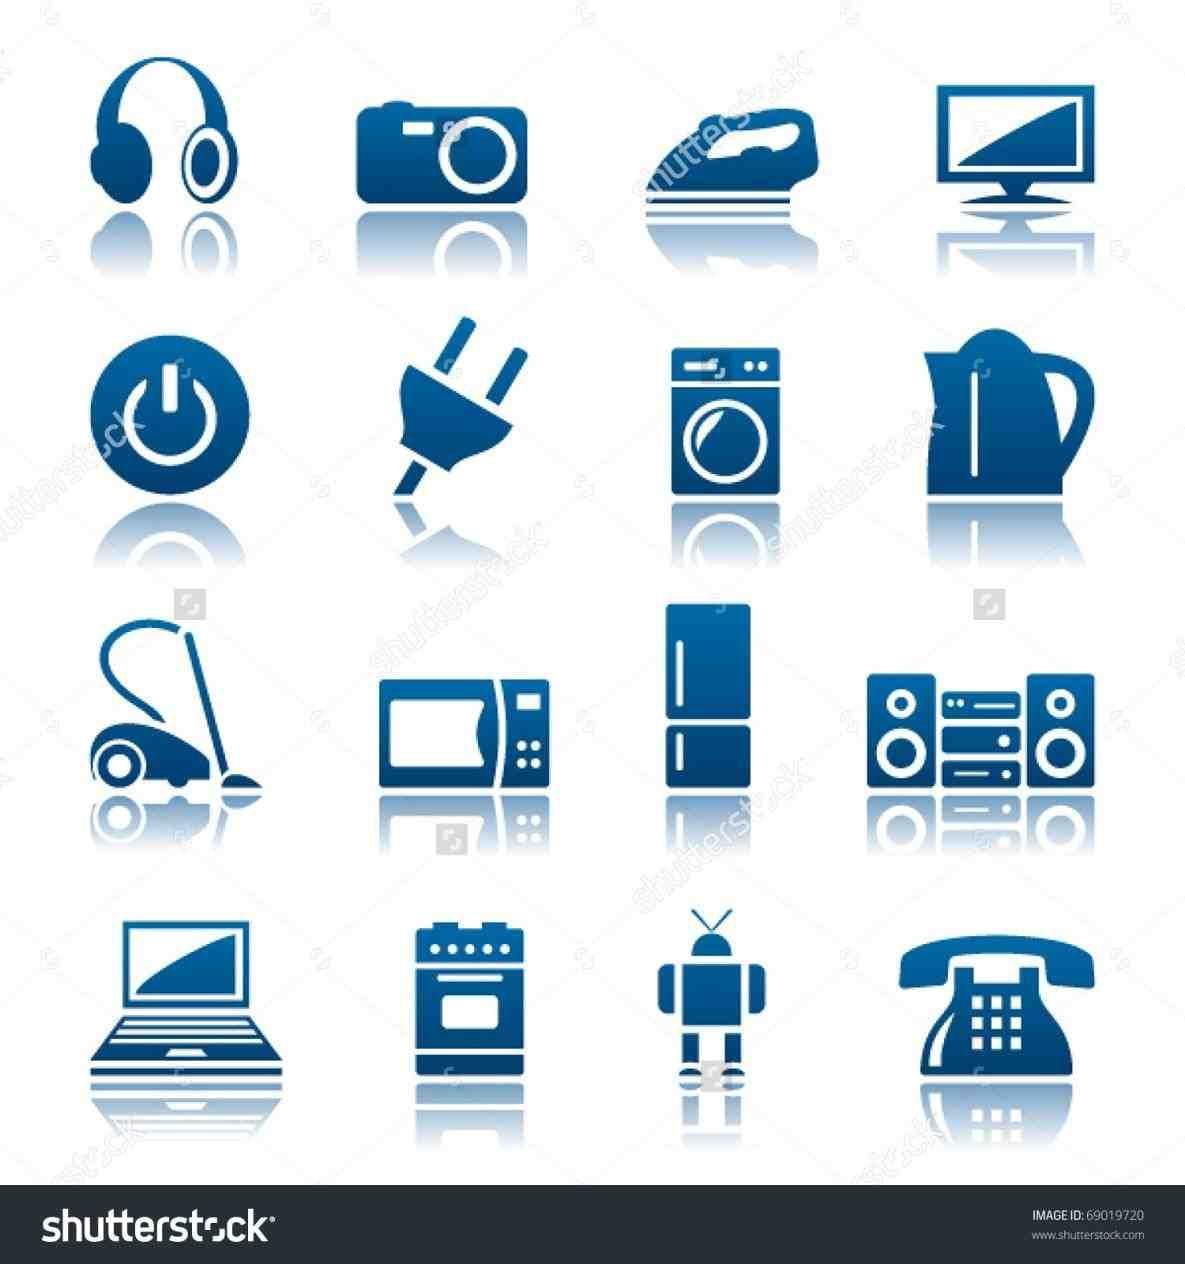 Home Appliance Logo - icon home symbol stock vector appliance care repairs wellingtonnz